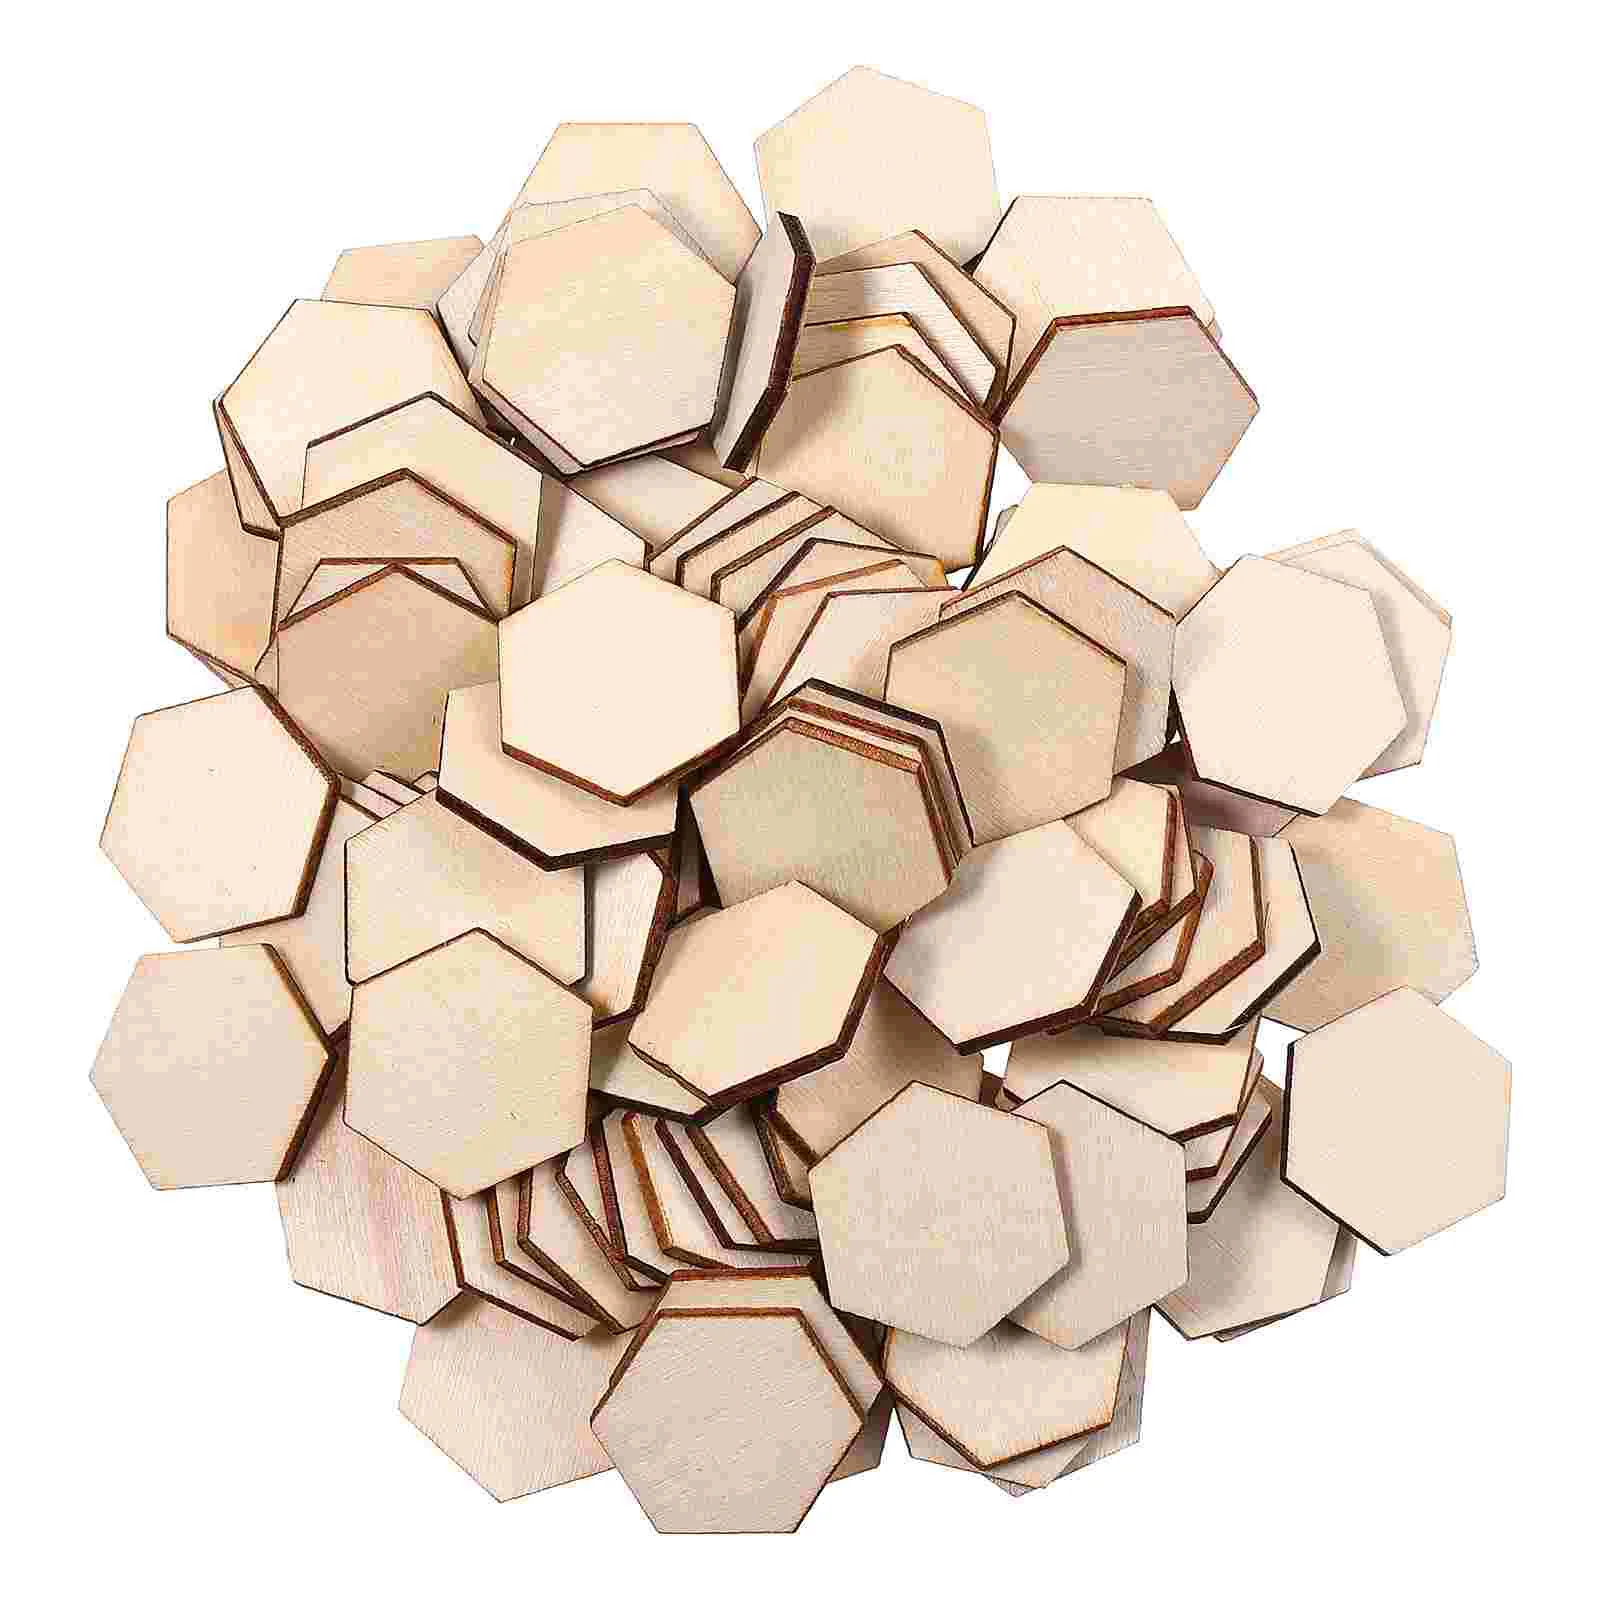 

Wood Cutouts Blank Unfinished Pieces Wooden Natural Board 25Mm Hexagonal Chips Slices Diy Crafts Hexagon